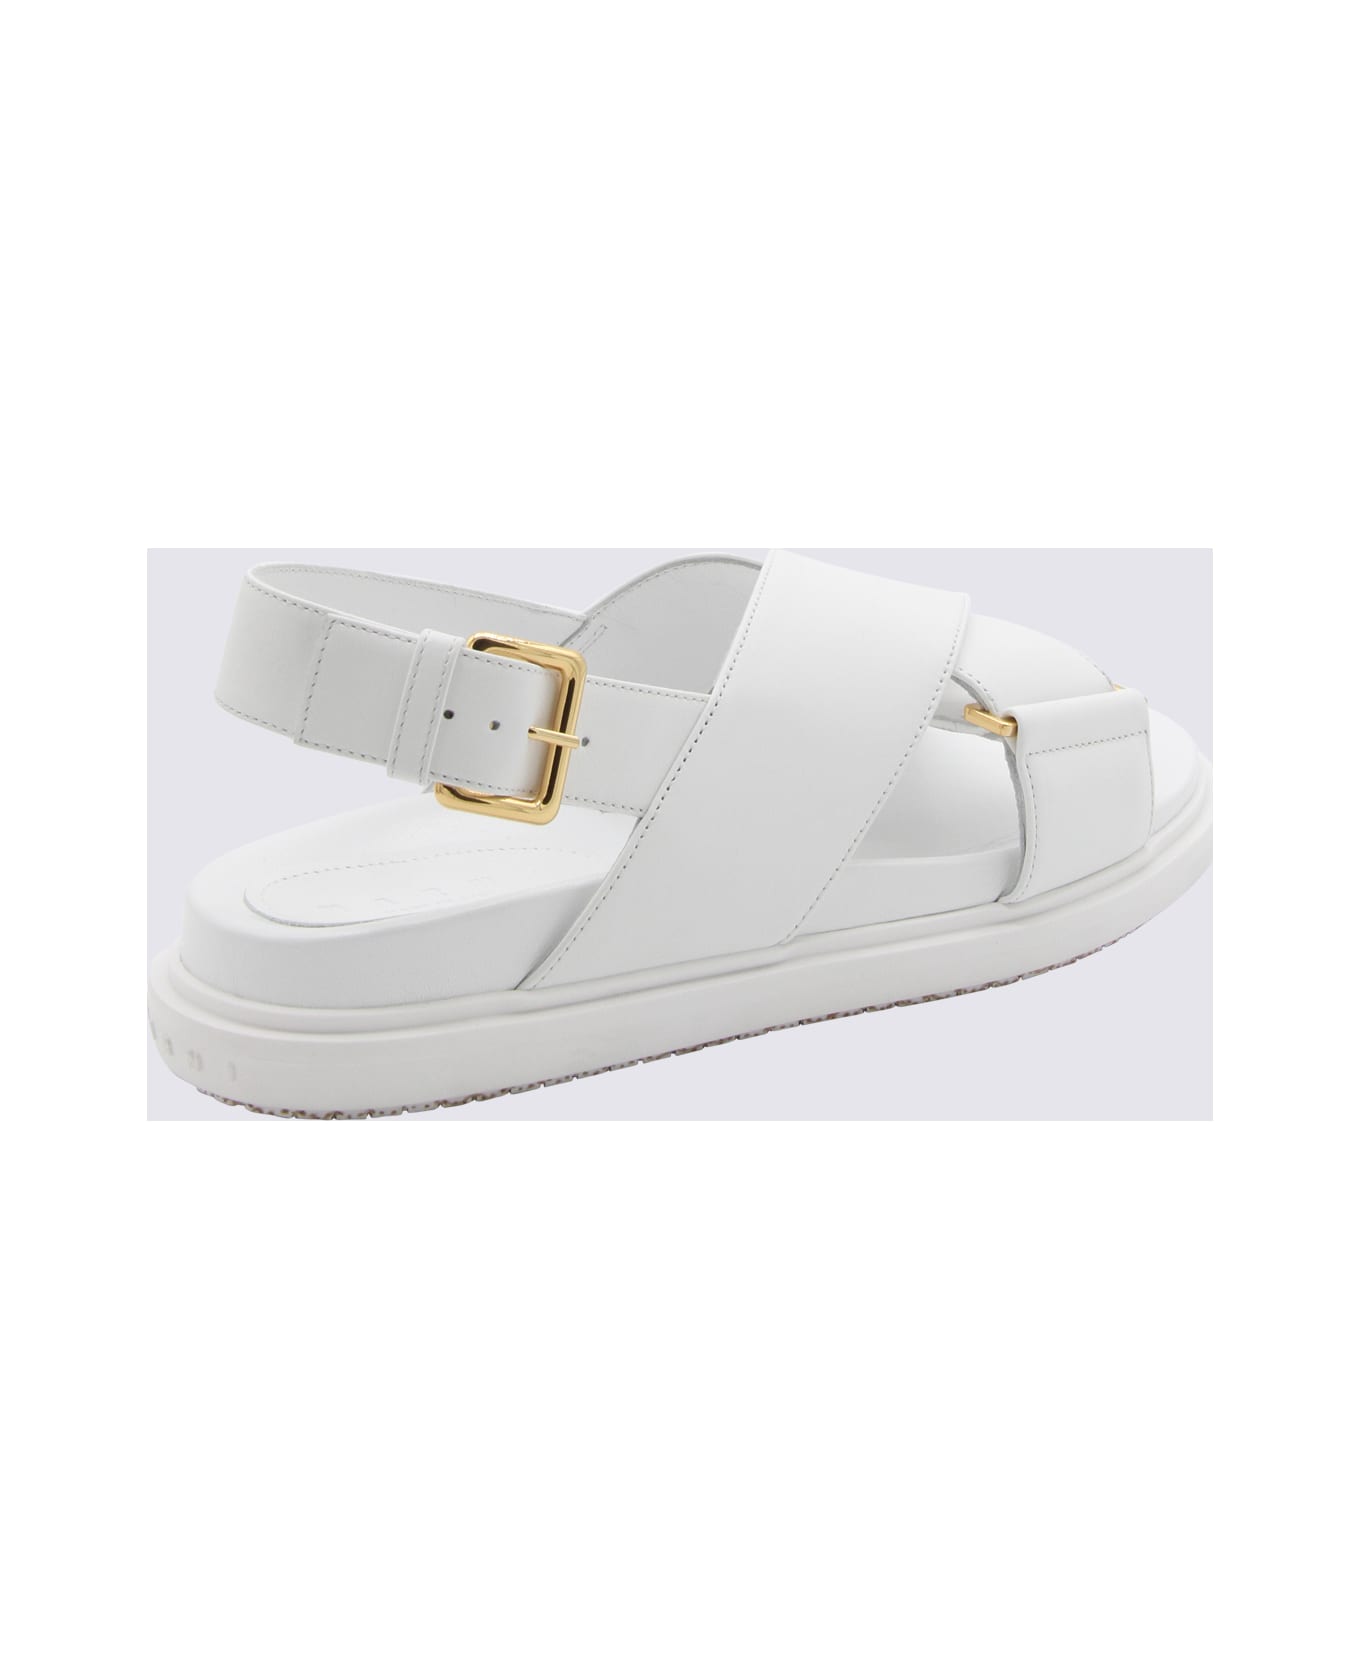 Marni White Leather Fussbet Sandals - LILY WHITE